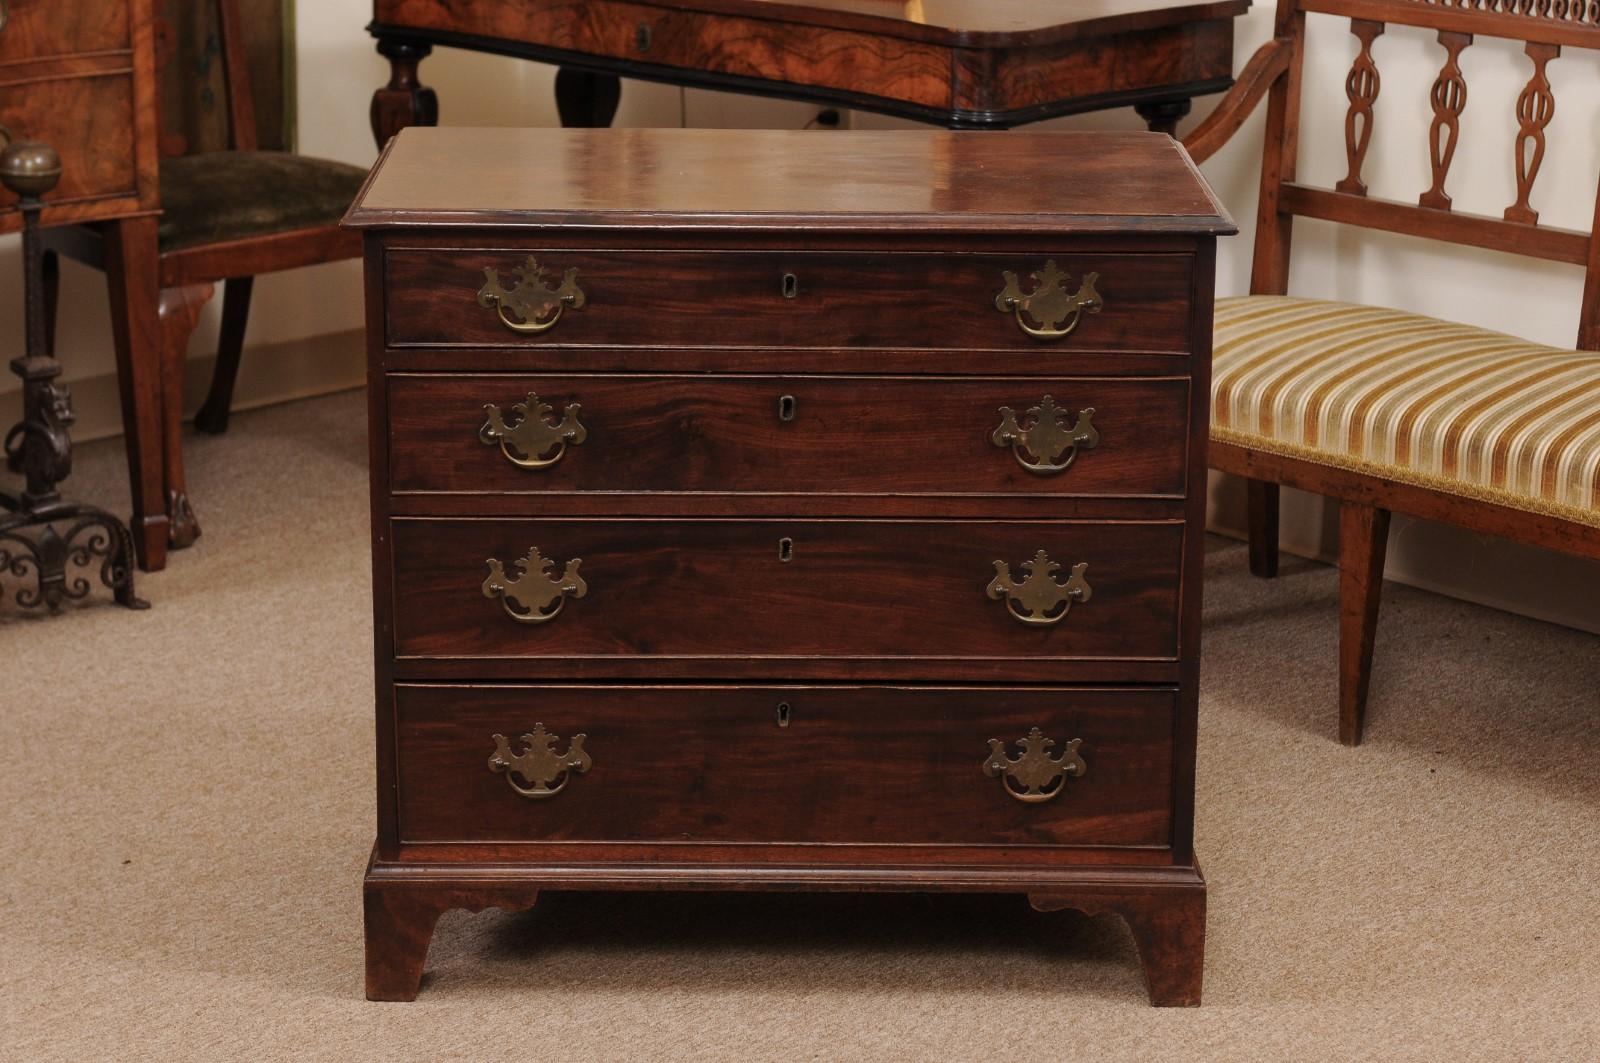 The George III mahogany bachelors chest with rectangular top and moulded edge above 4 drawers with brass pulls and backplate. All resting on carved bracket feet.